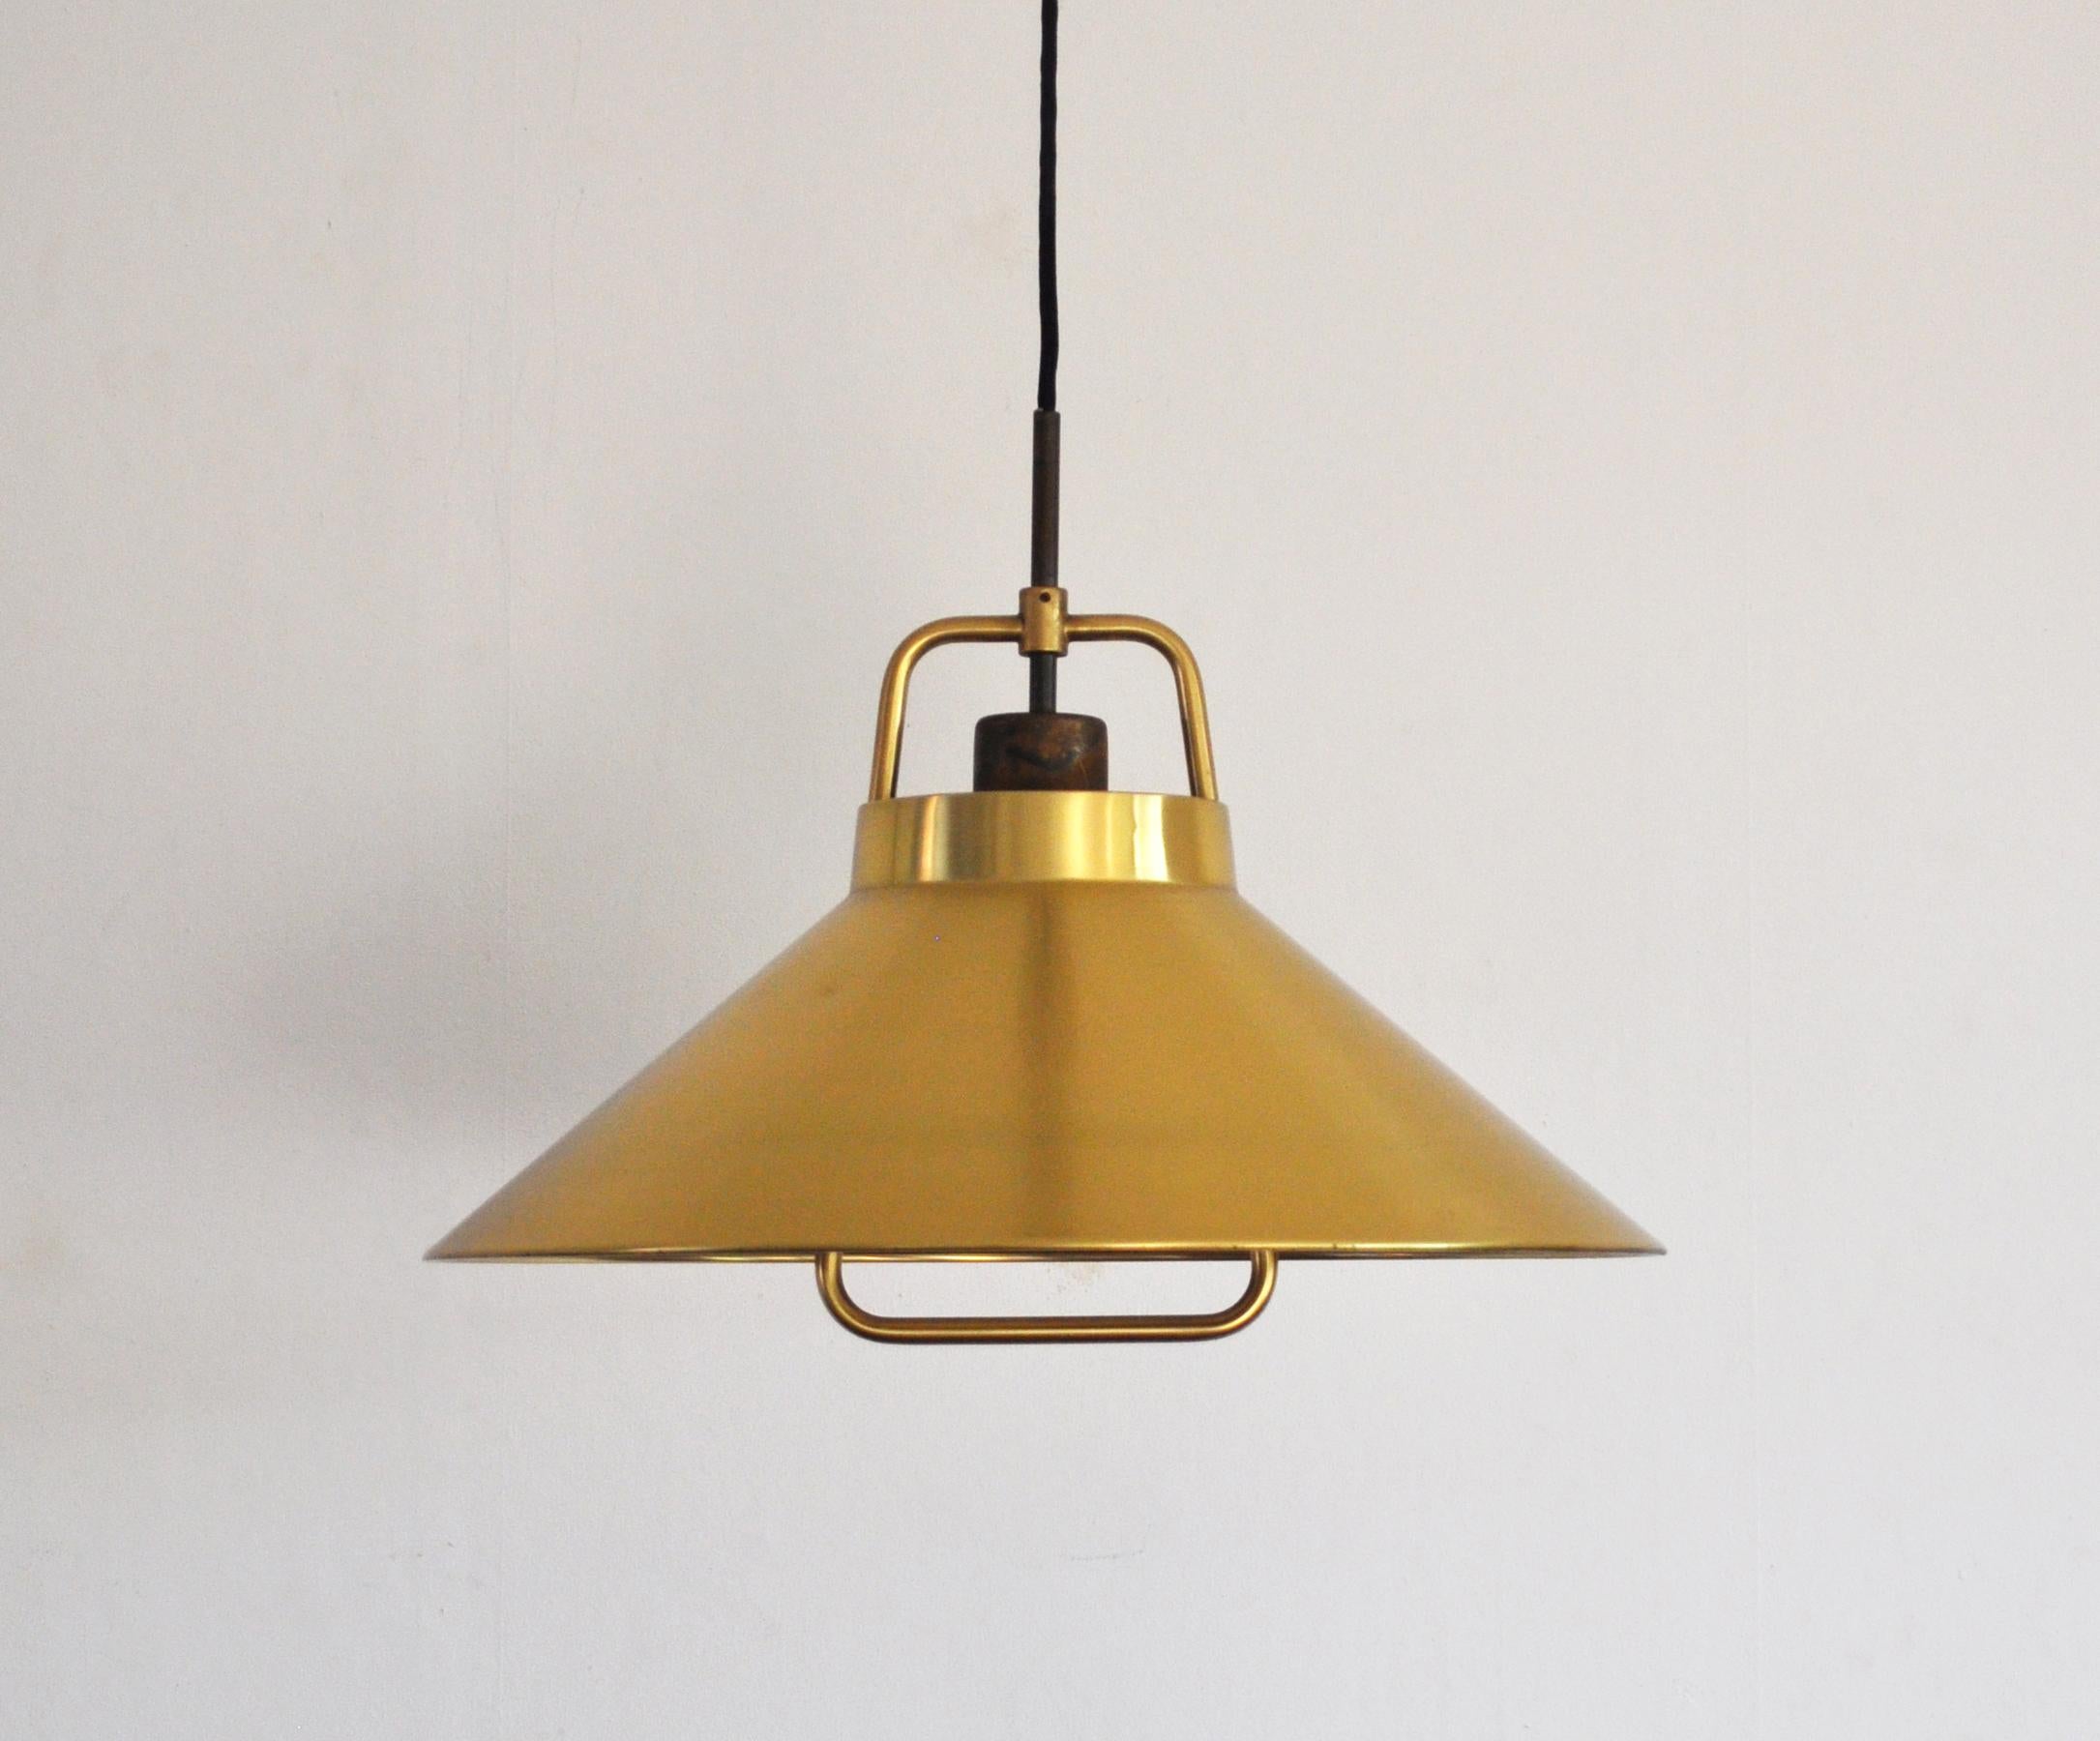 Solid brass pendant designed by Frits Schlegel in the 1960s. Manufactured by Lyfa, Denmark.
Adjustable height and original canopy. 
Fine patinated condition with some signs of wear. 

Dimensions: 
Diameter 44 cm 
Height (adjustable) 100 cm as